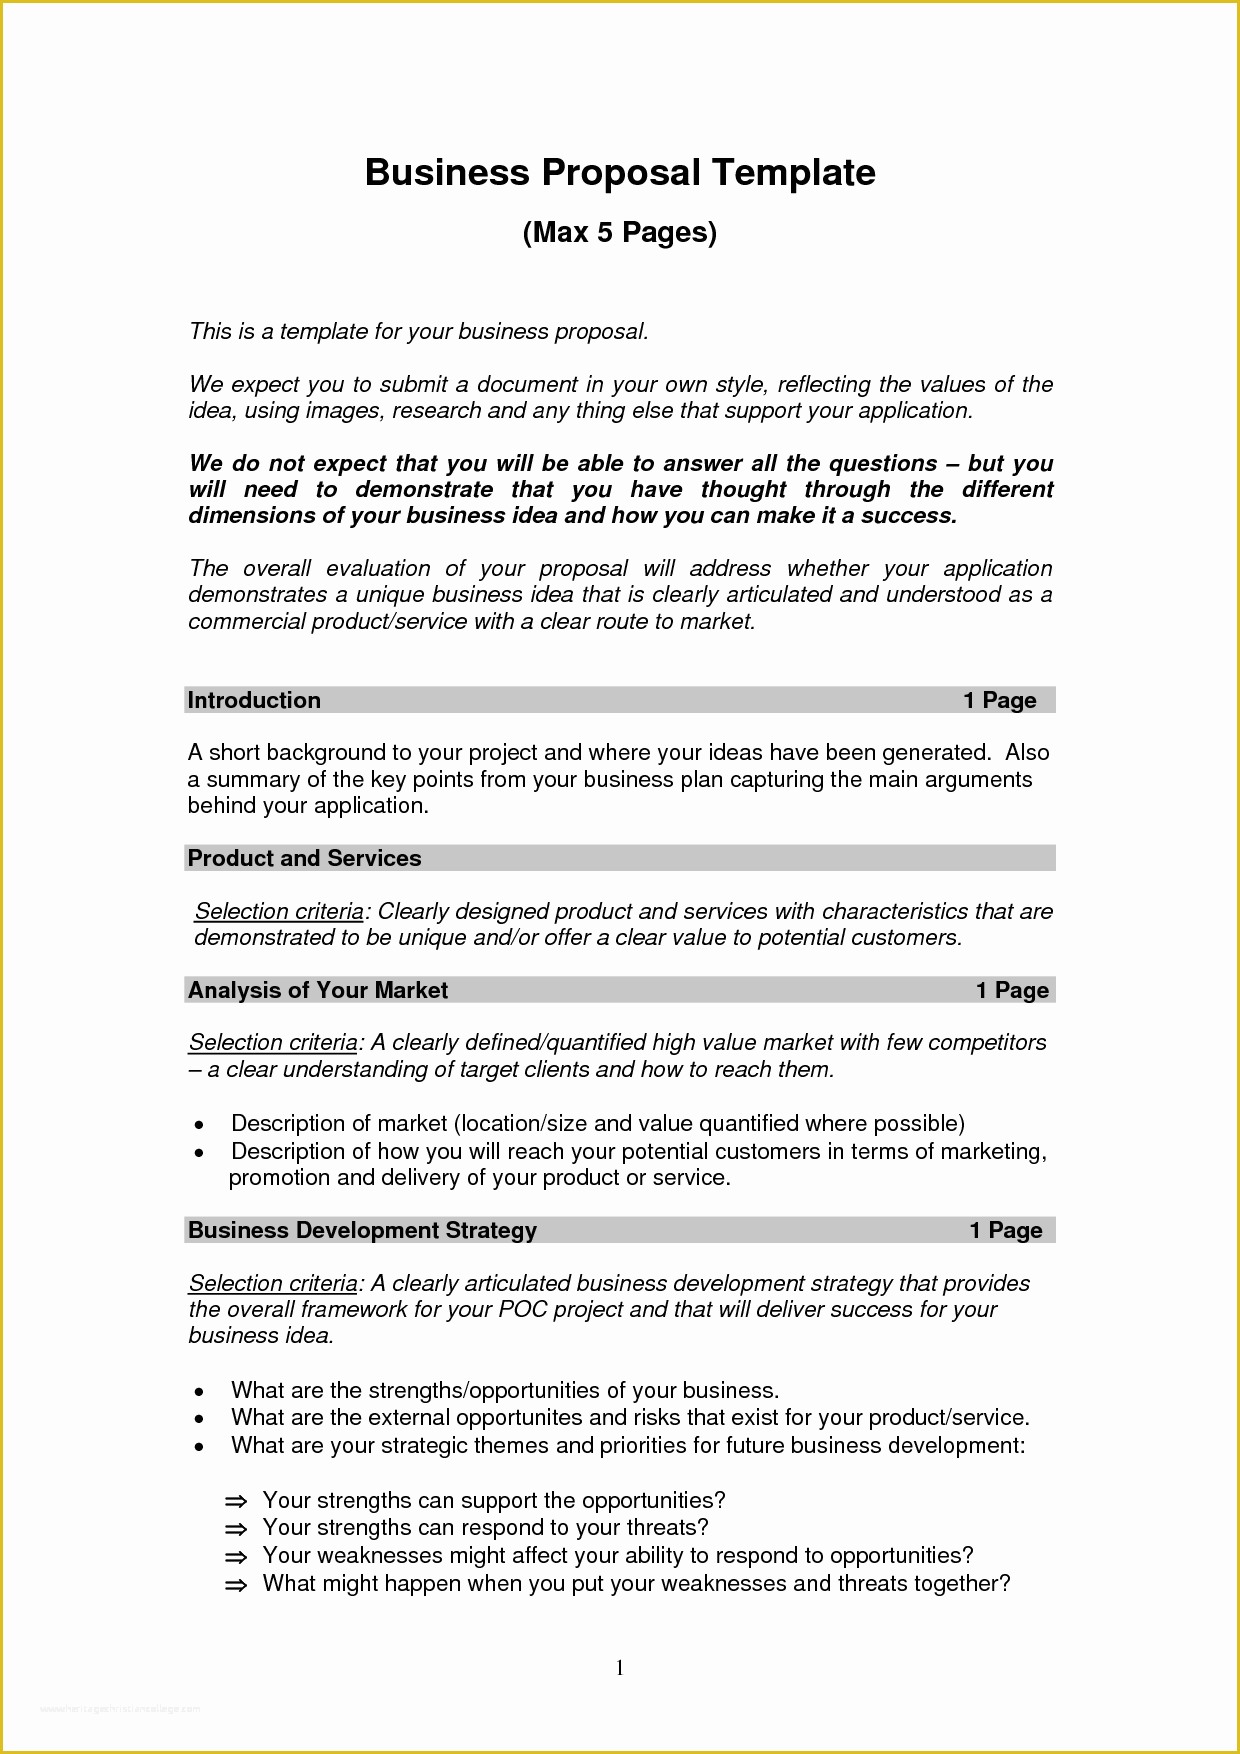 Free Sample Business Proposal Template Of Printable Sample Business Proposal Template form